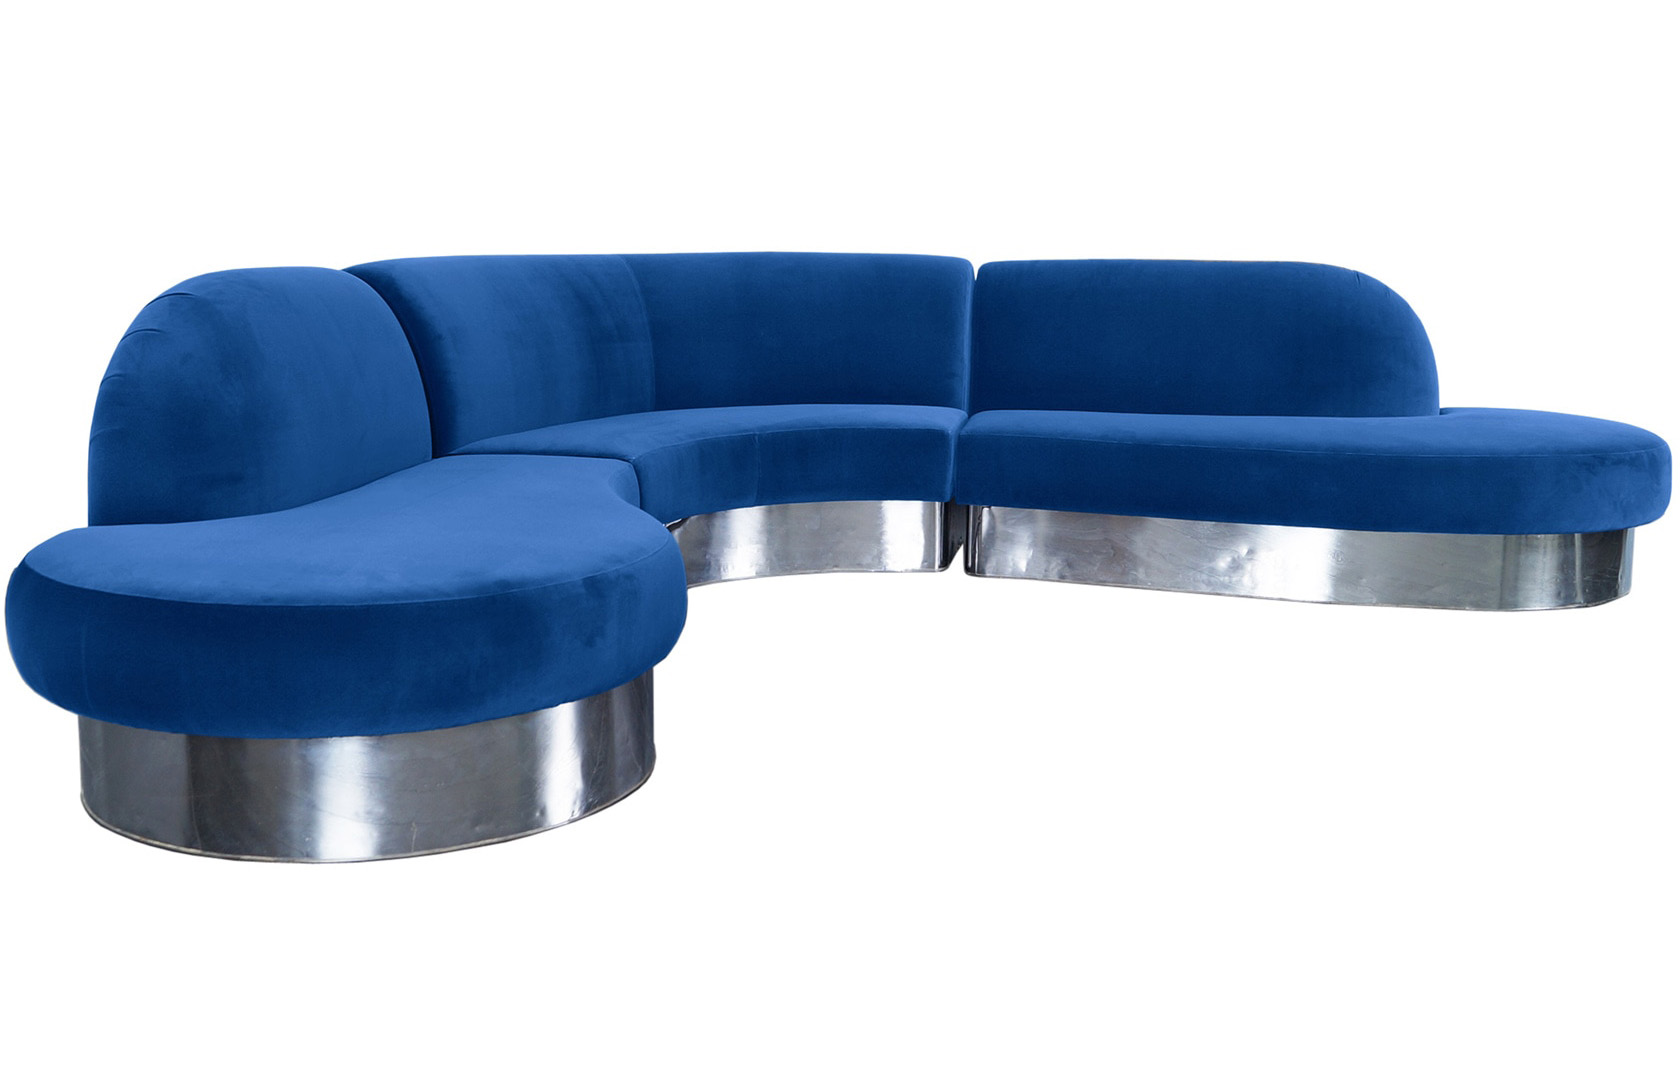 Vintage Chrome Curved Sectional Sofa by Milo Baughman